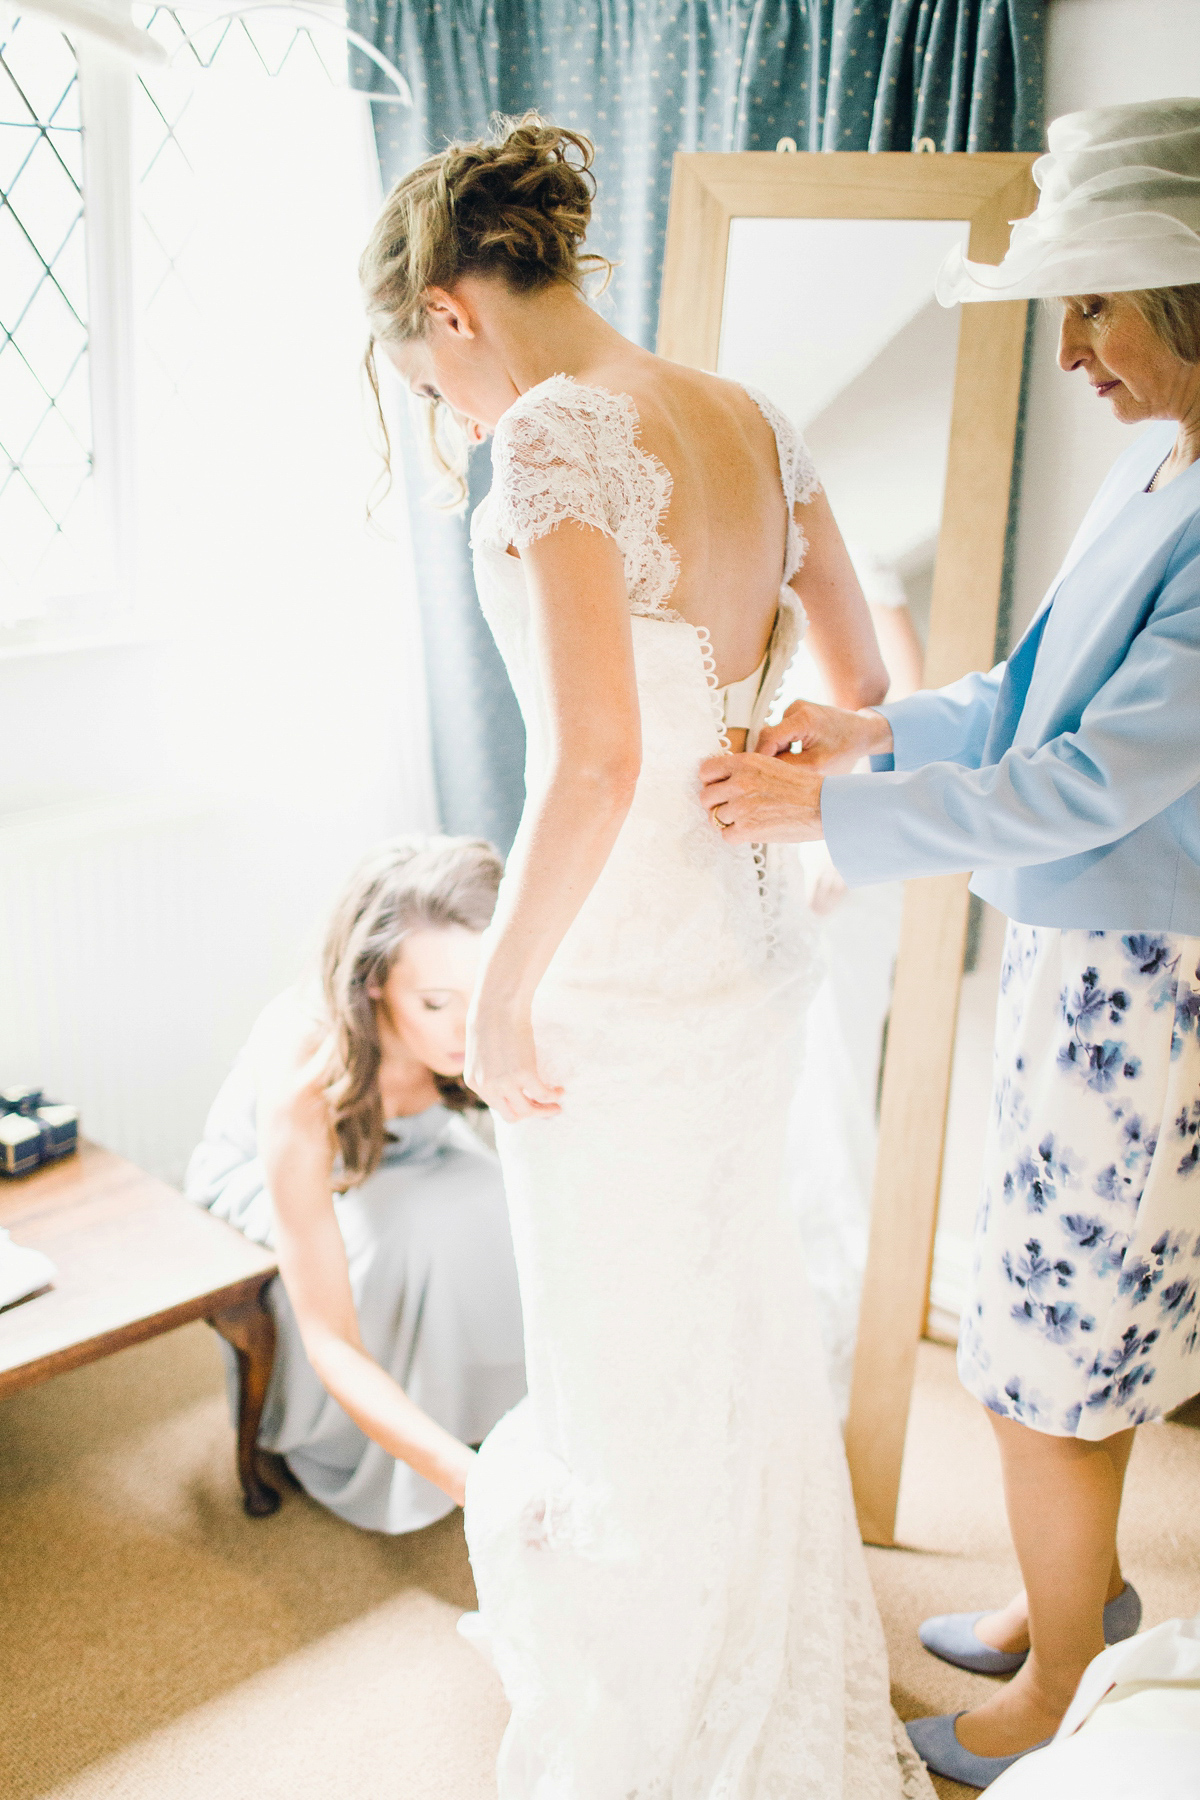 Kirsty wore a Stewart Parvin gown for her elegant and charming English Lake District wedding. Photography by Jessica Reeve.